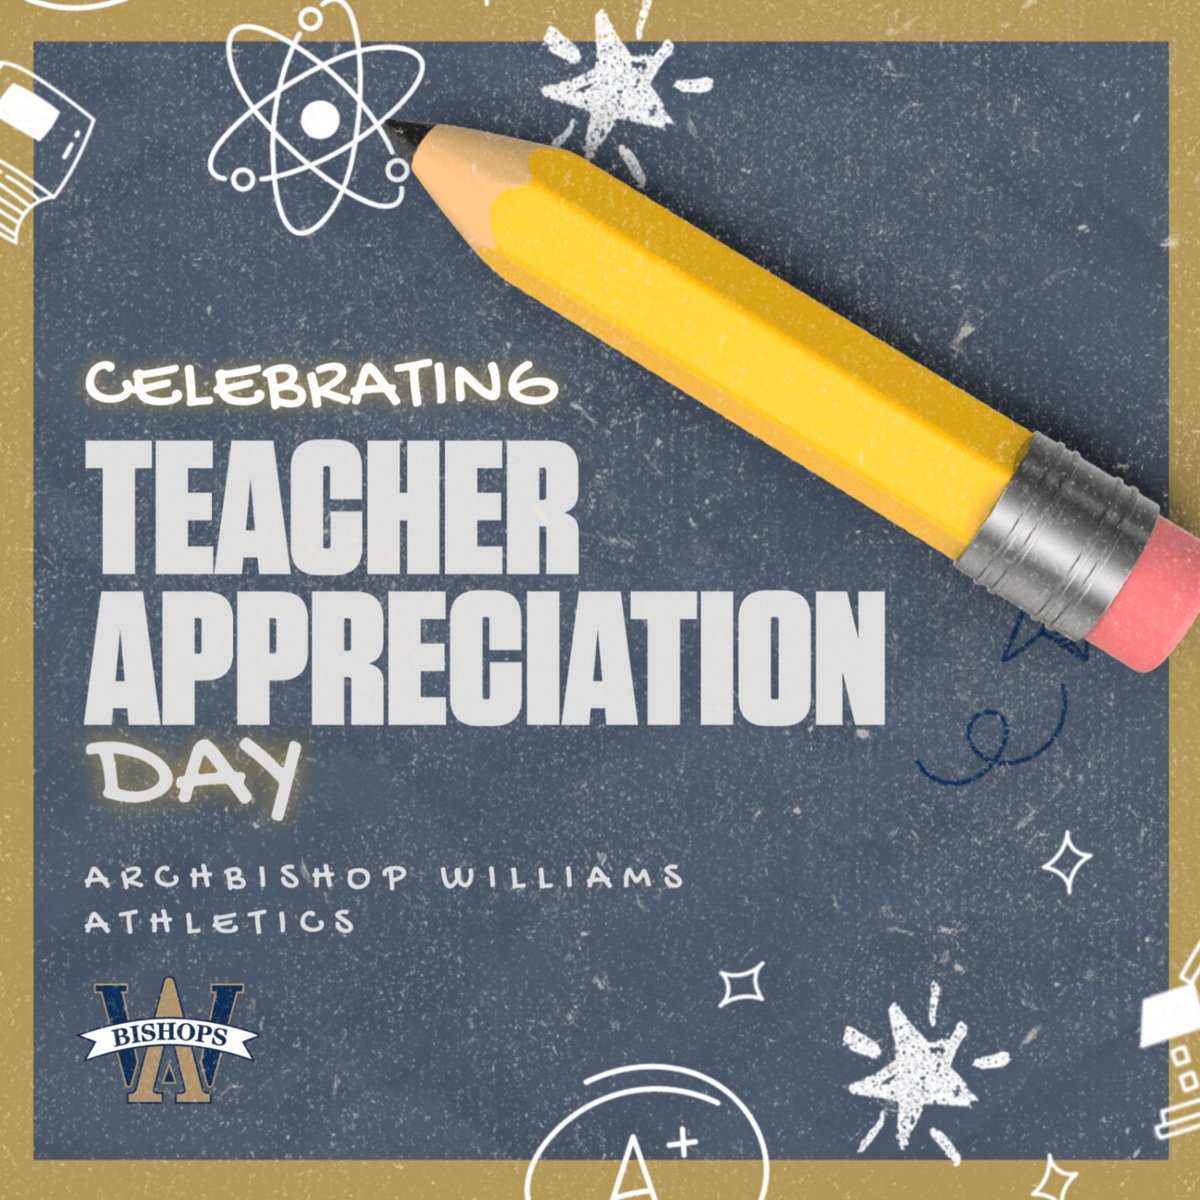 Happy Teacher Appreciation Day to all of our amazing teachers here at AWHS! We are beyond lucky to have many AWHS teachers make a positive impact both in our classrooms and on our teams as coaches! Thank you! #rollbills